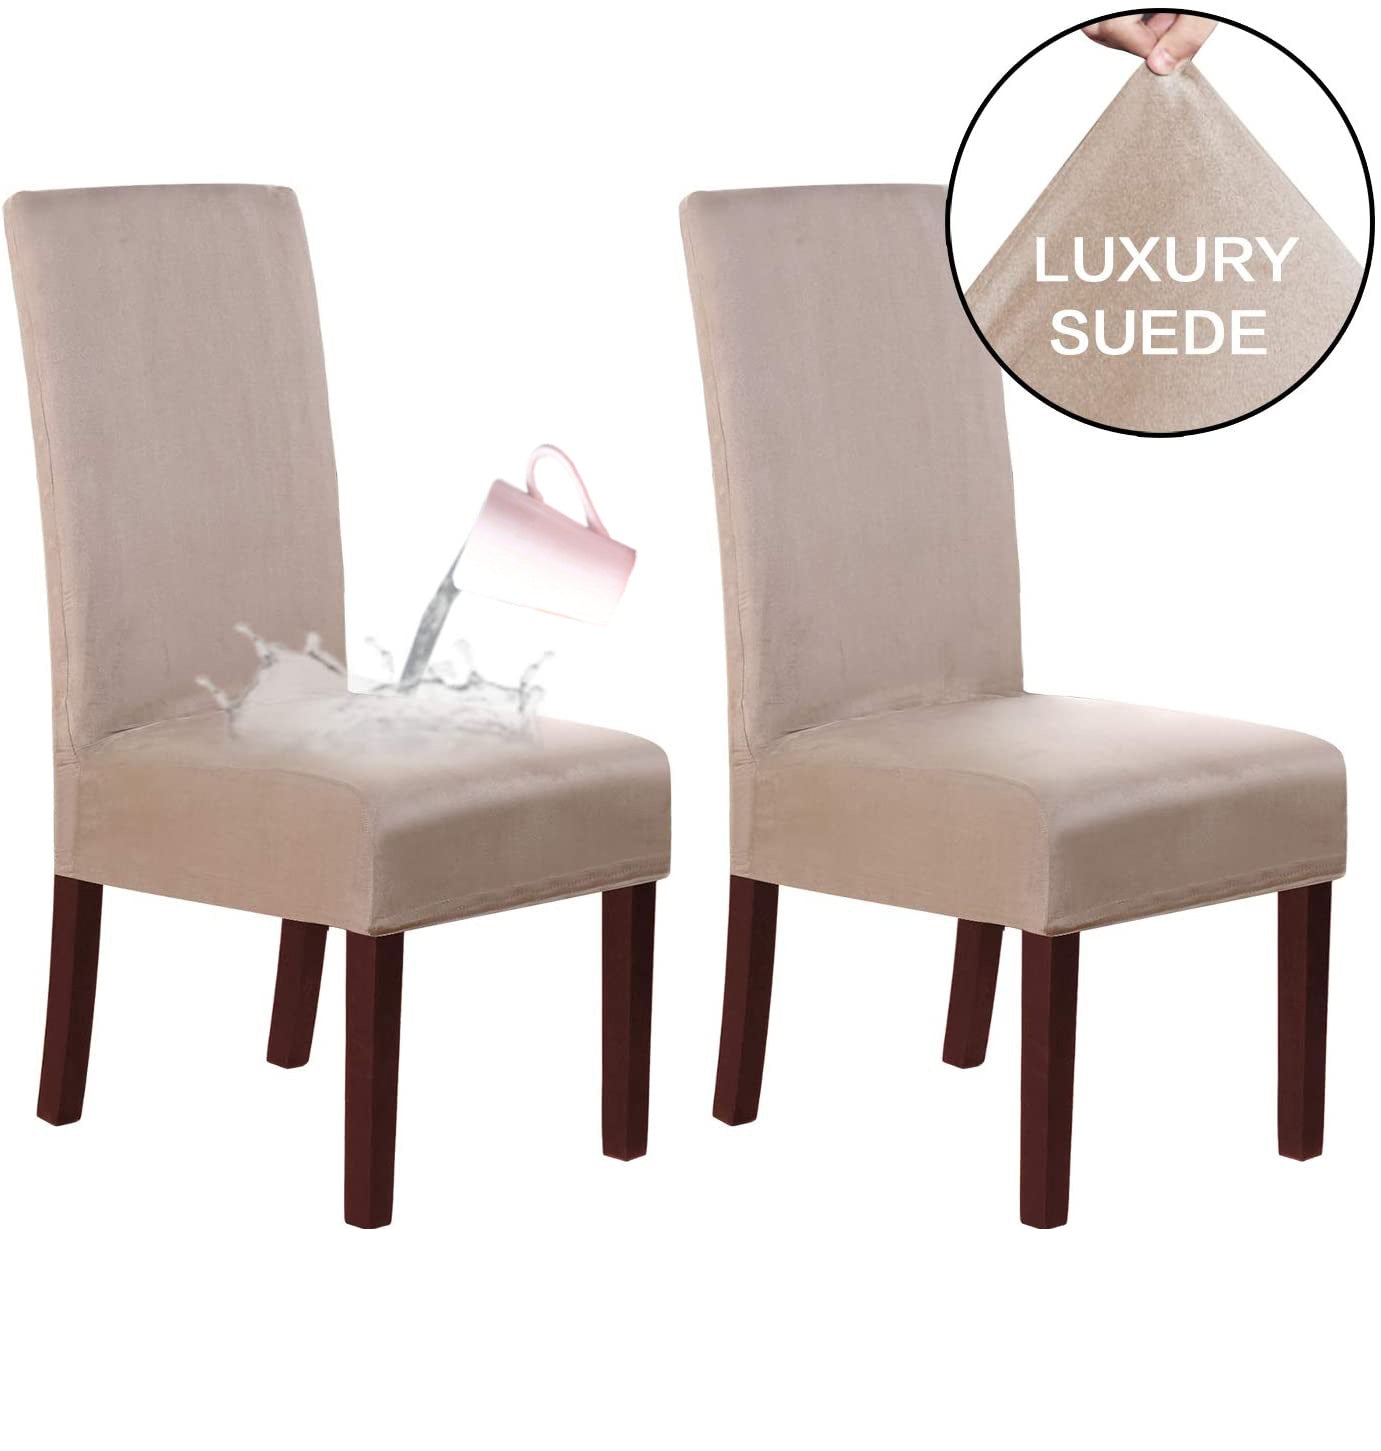 Waterproof Suede Dining Chair Cover